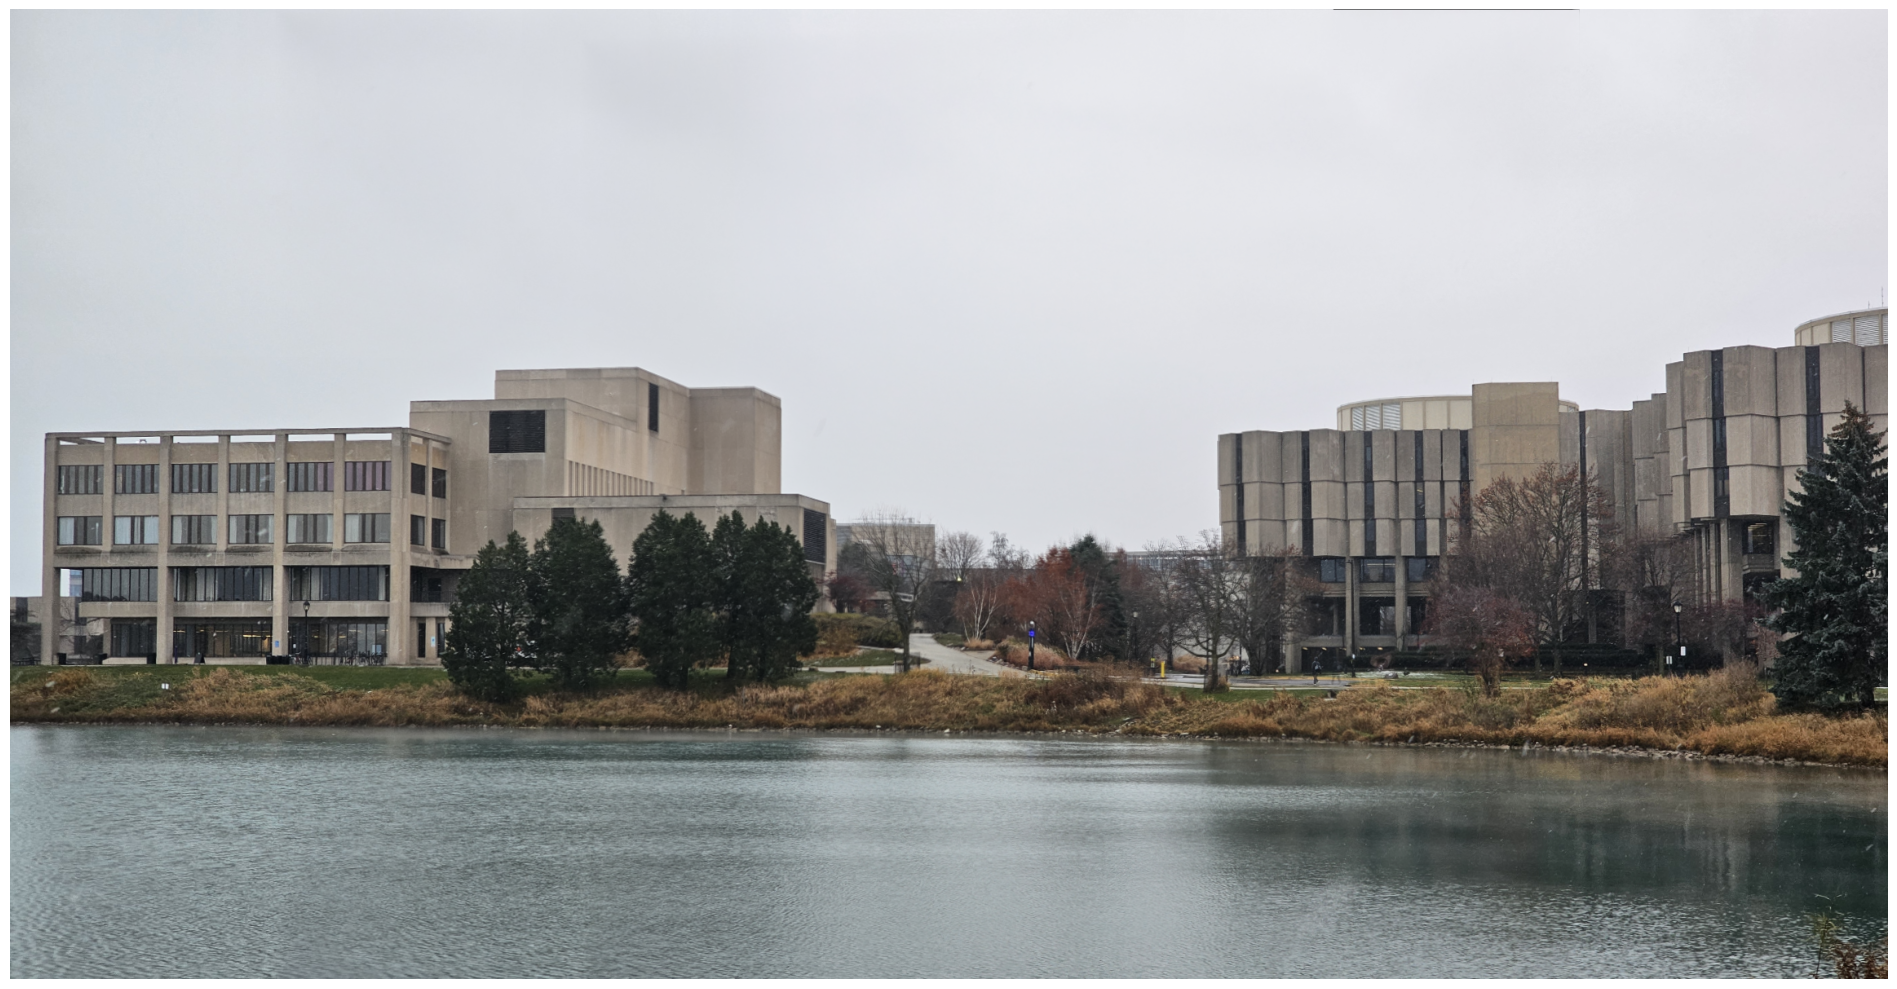 A stitched image of the Norris Student Center and University Main Library at Northwestern.